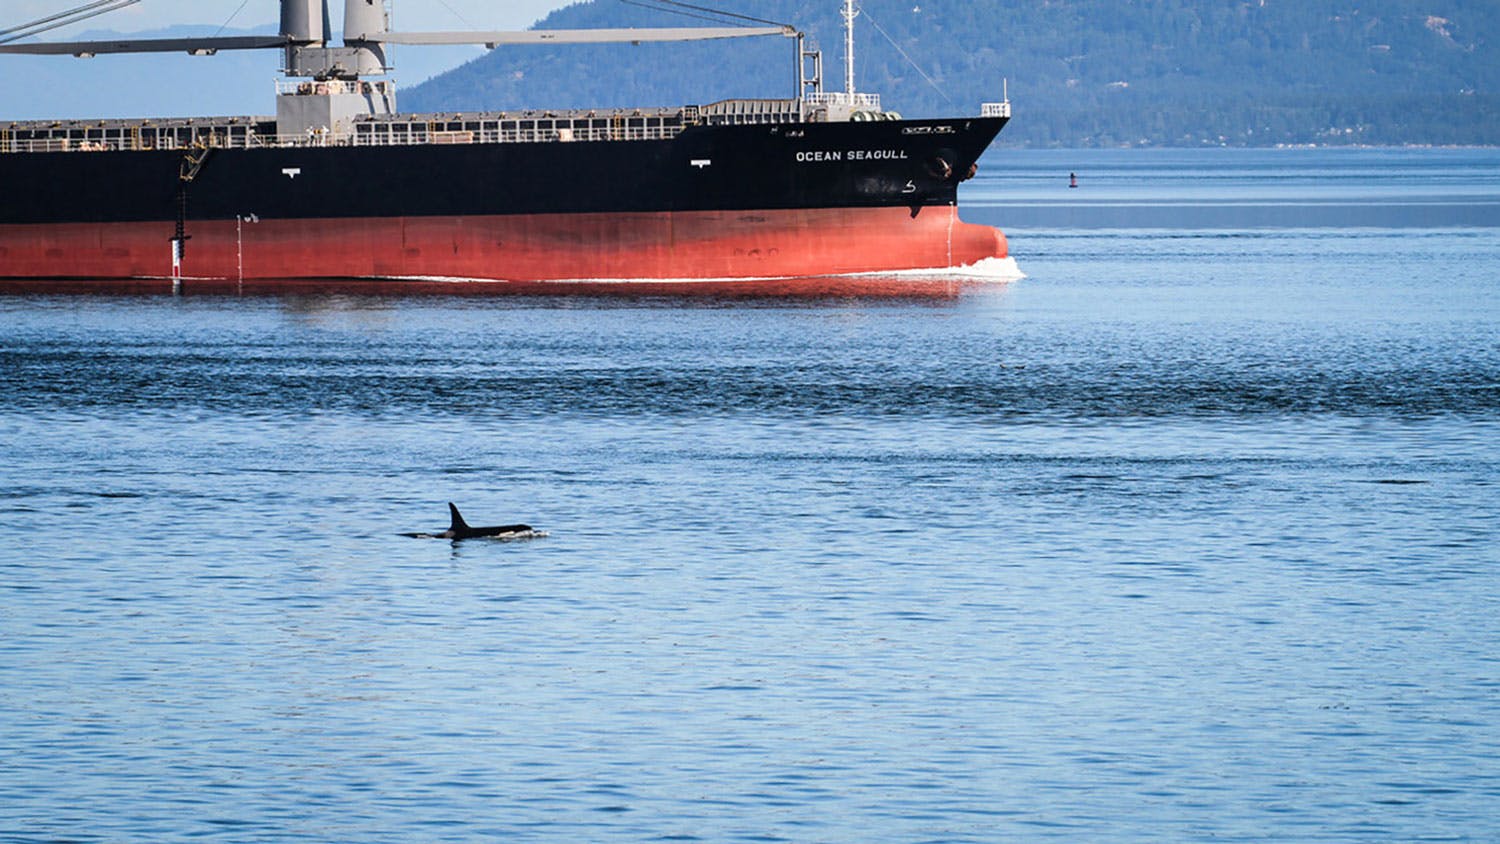 An orca peeks above the water in the Boundary Pass international shipping channel, near the BC coast, near a cargo ship.